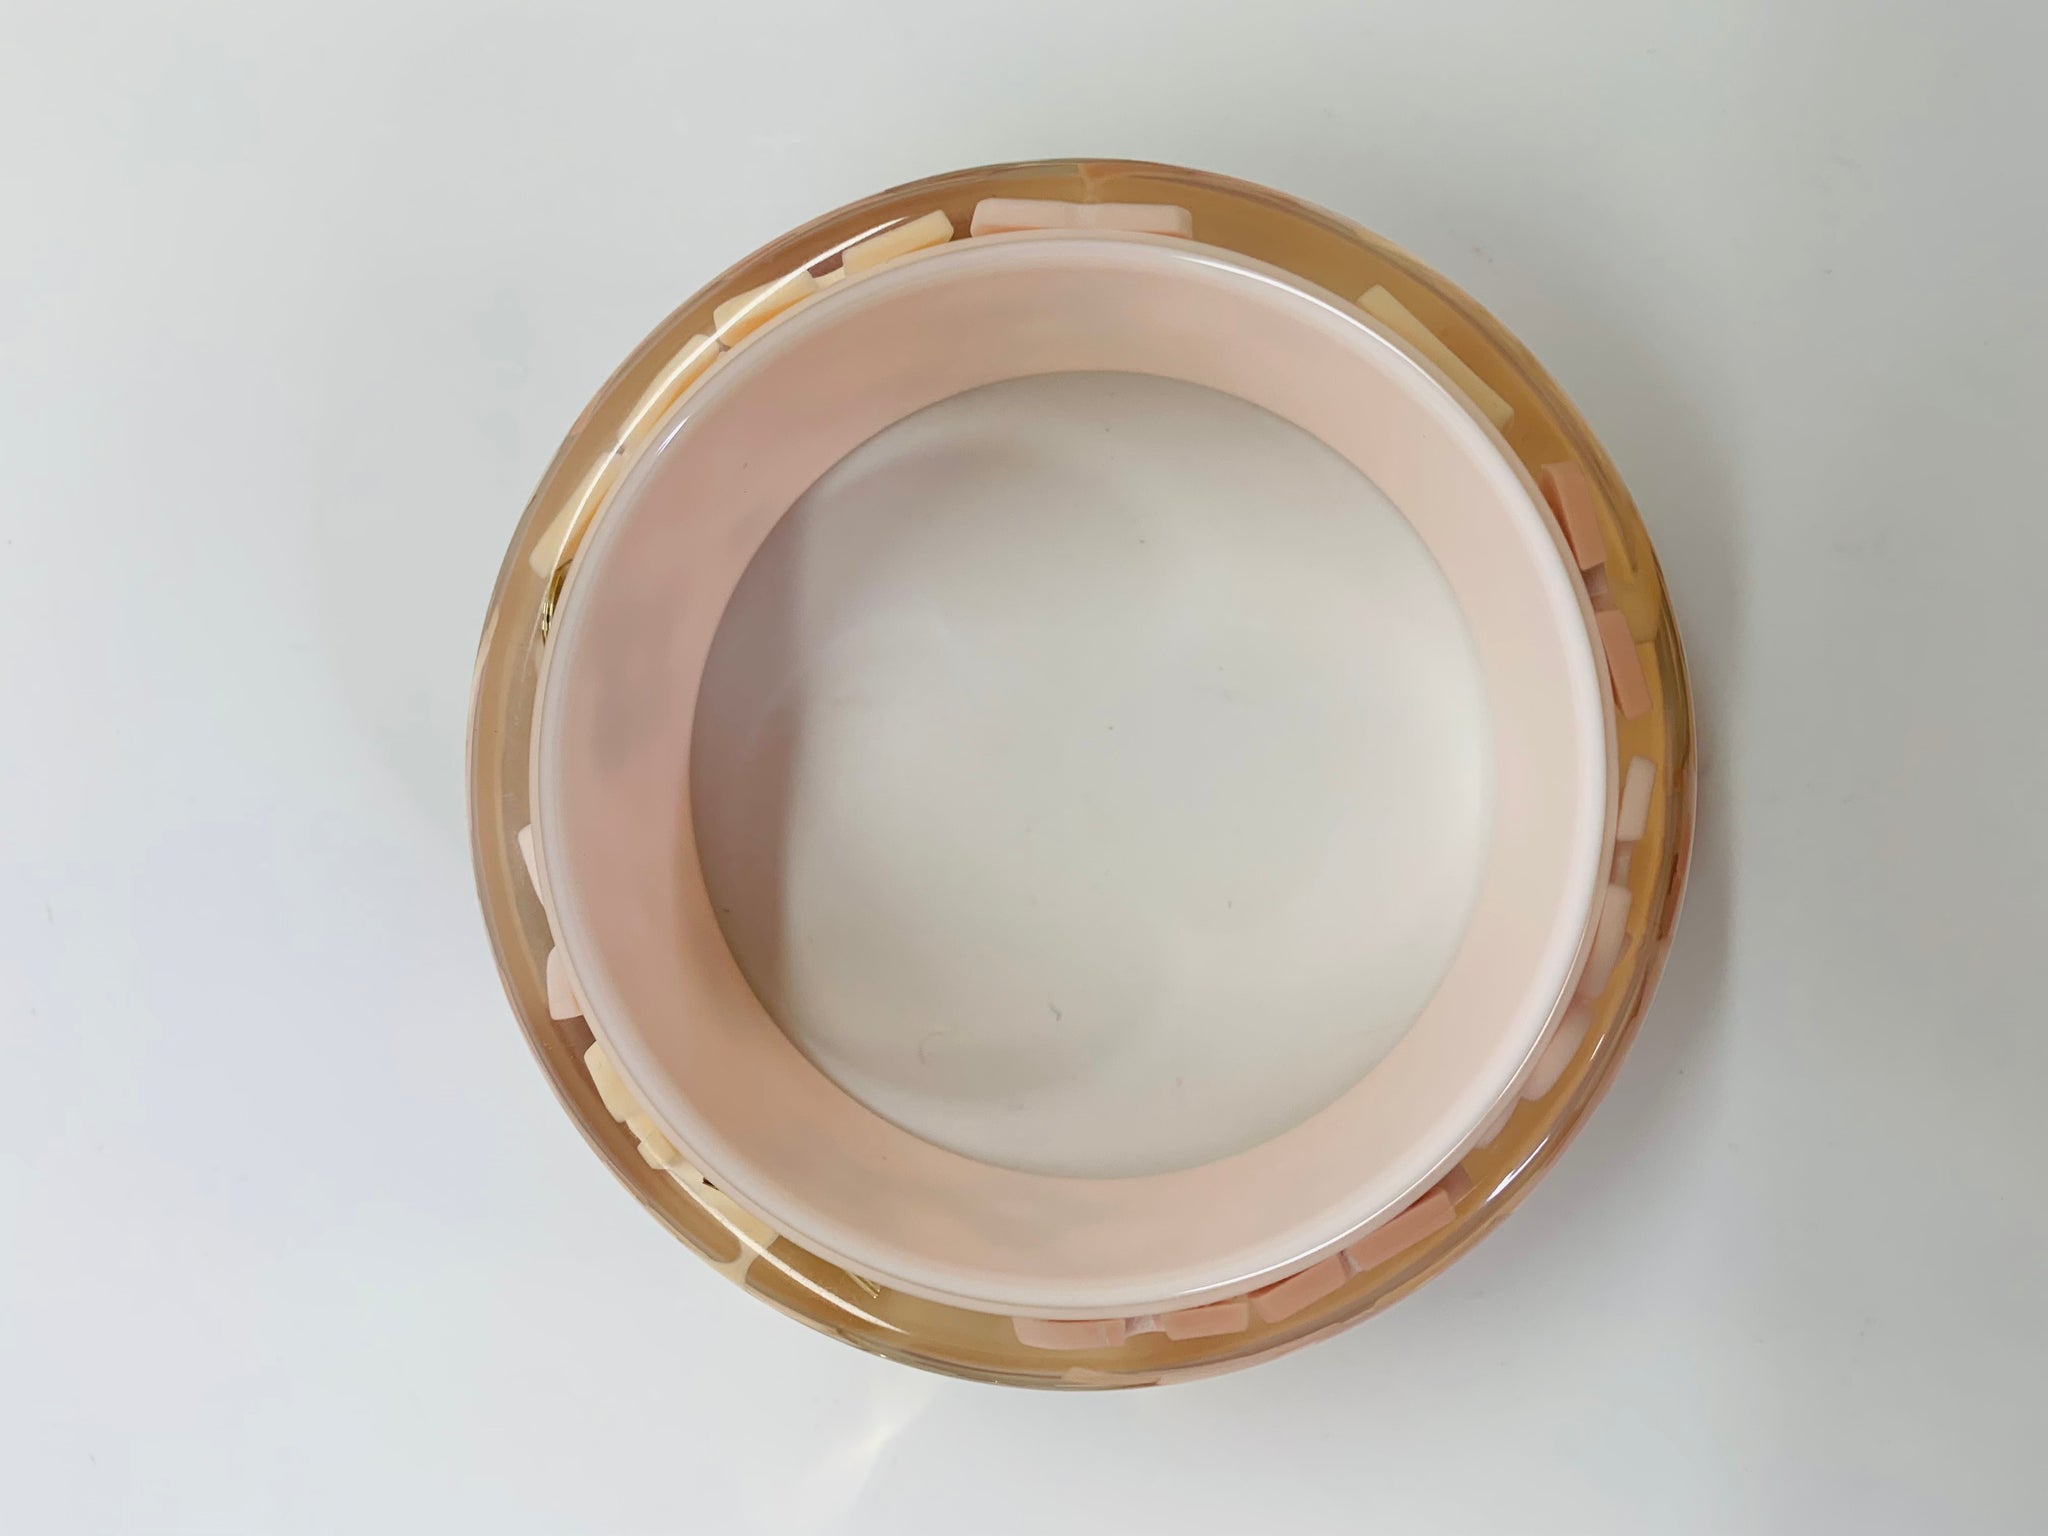 Louis Vuitton Pink and Gold Inclusion Wide Resin Bangle Bracelet